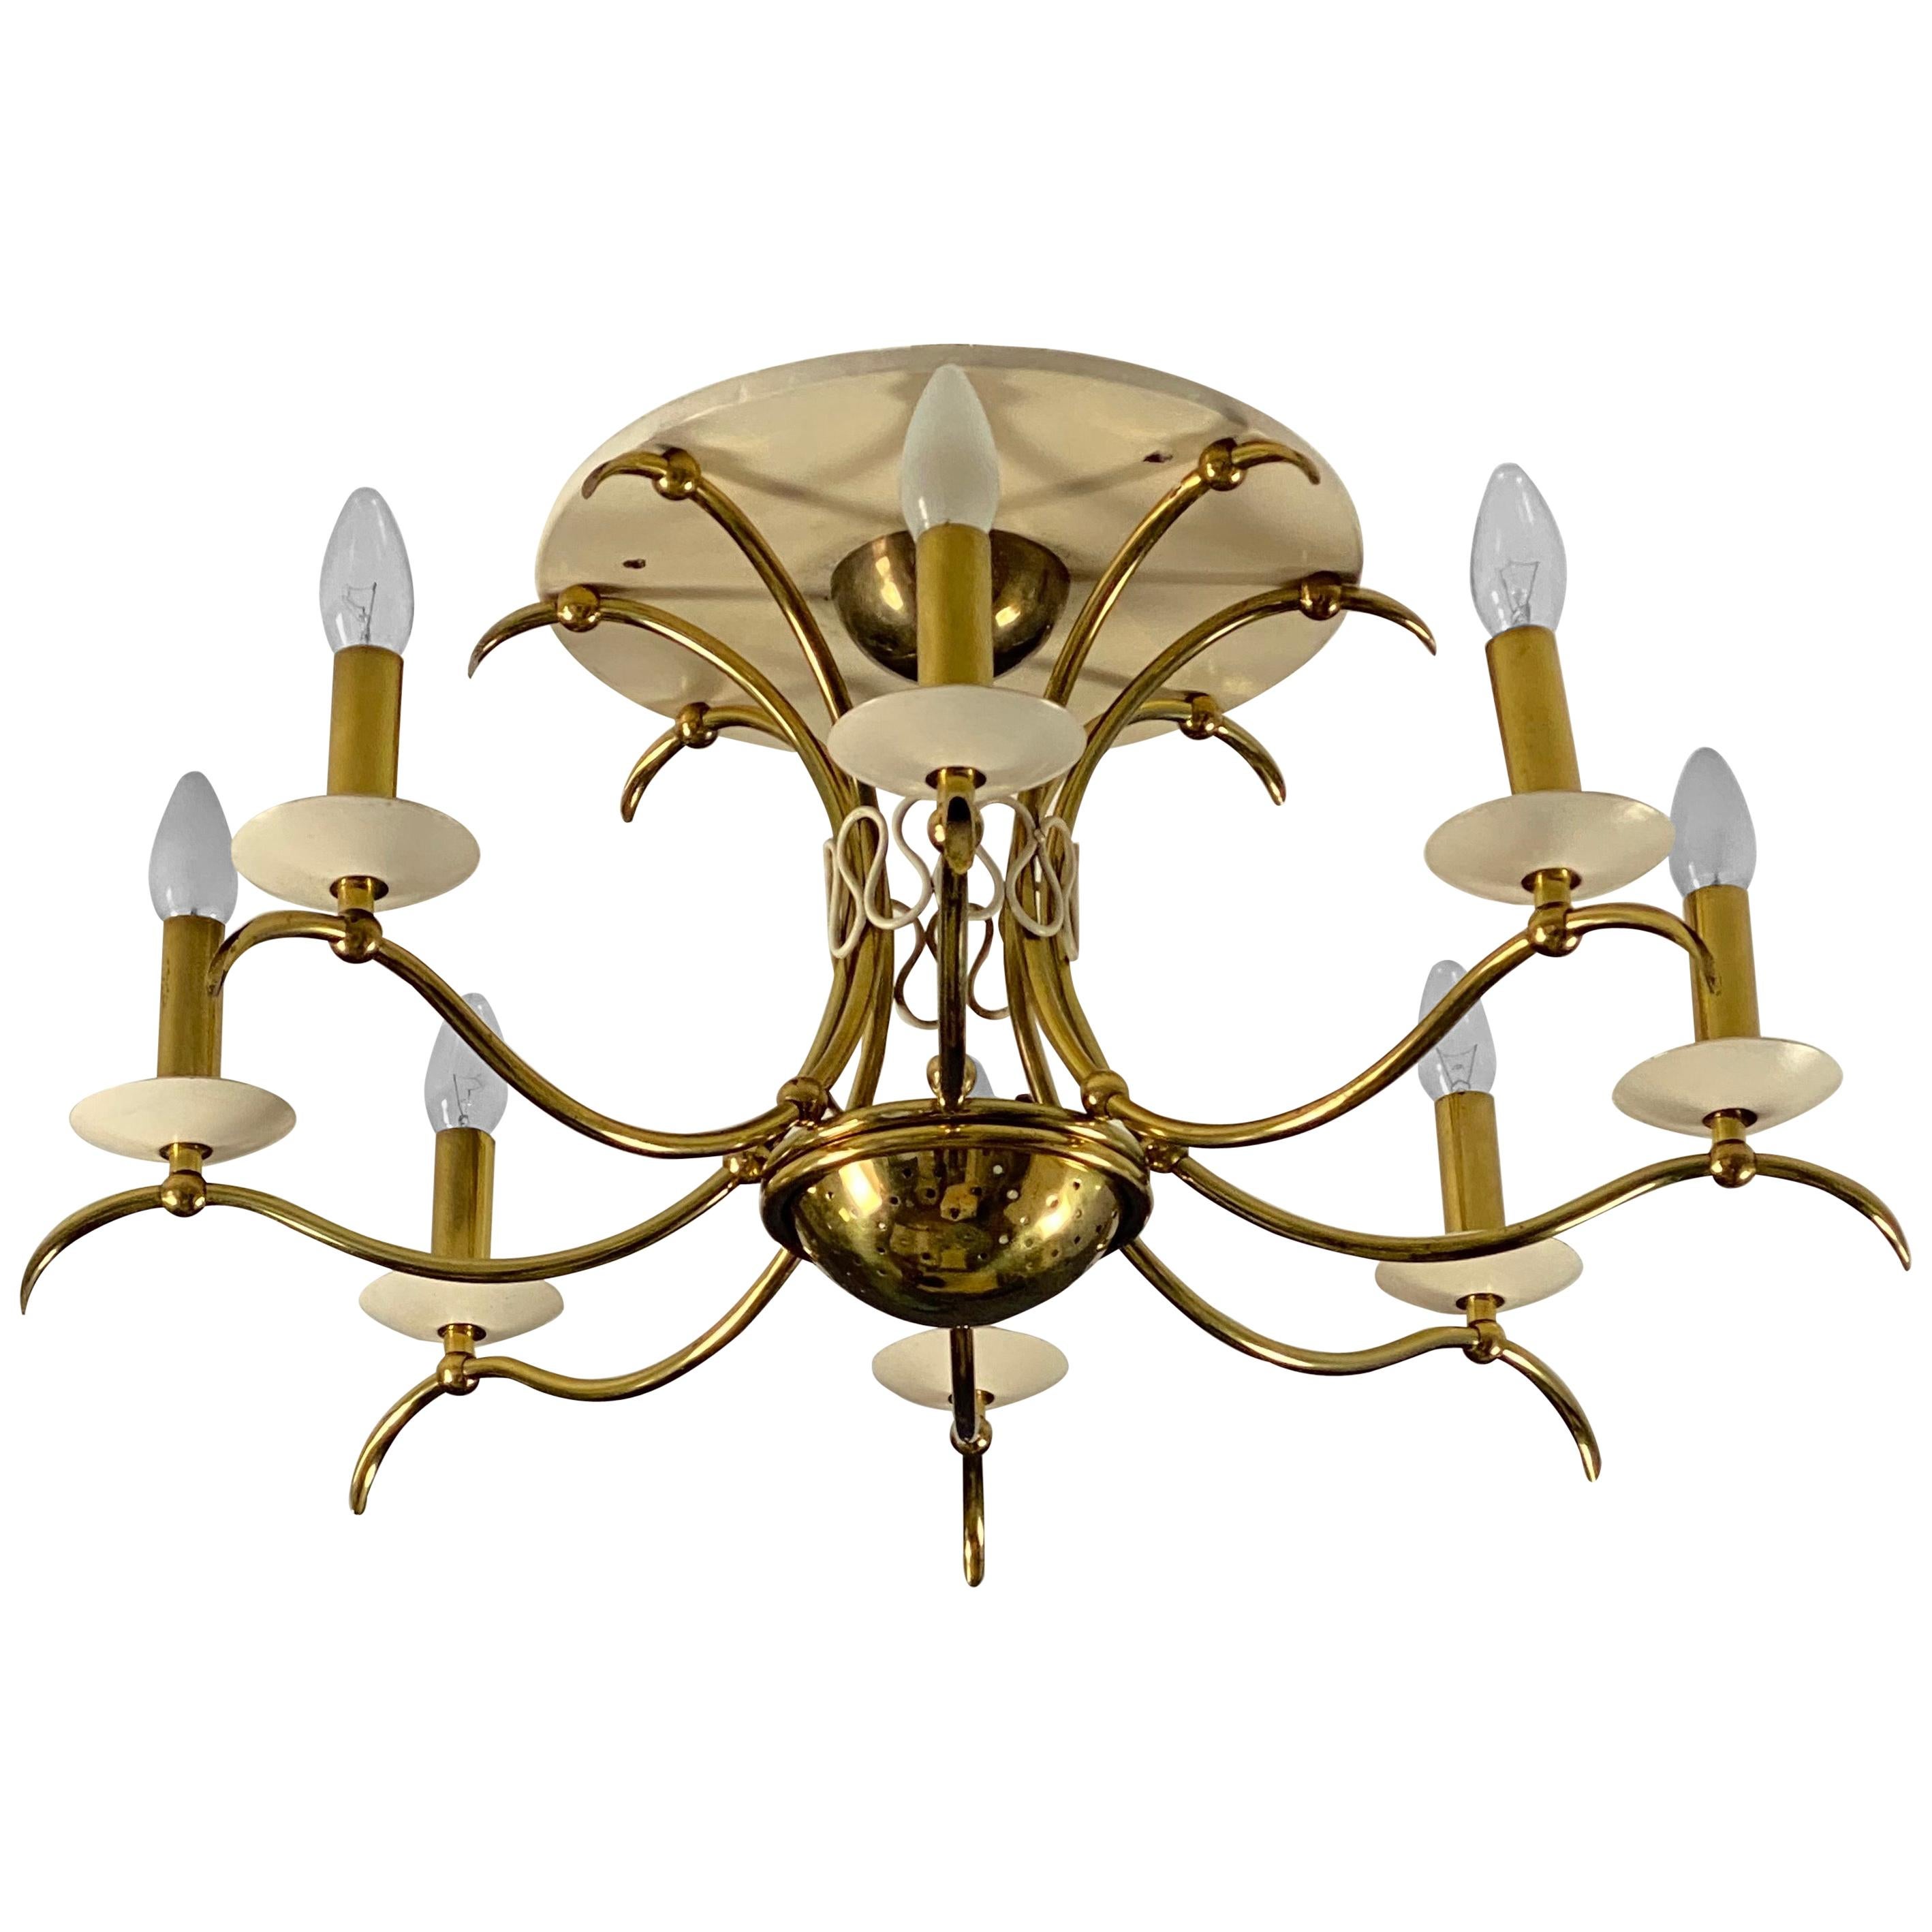 Midcentury Brass Chandelier Flush Mount 1950s in the Style of or from Gio Ponti For Sale